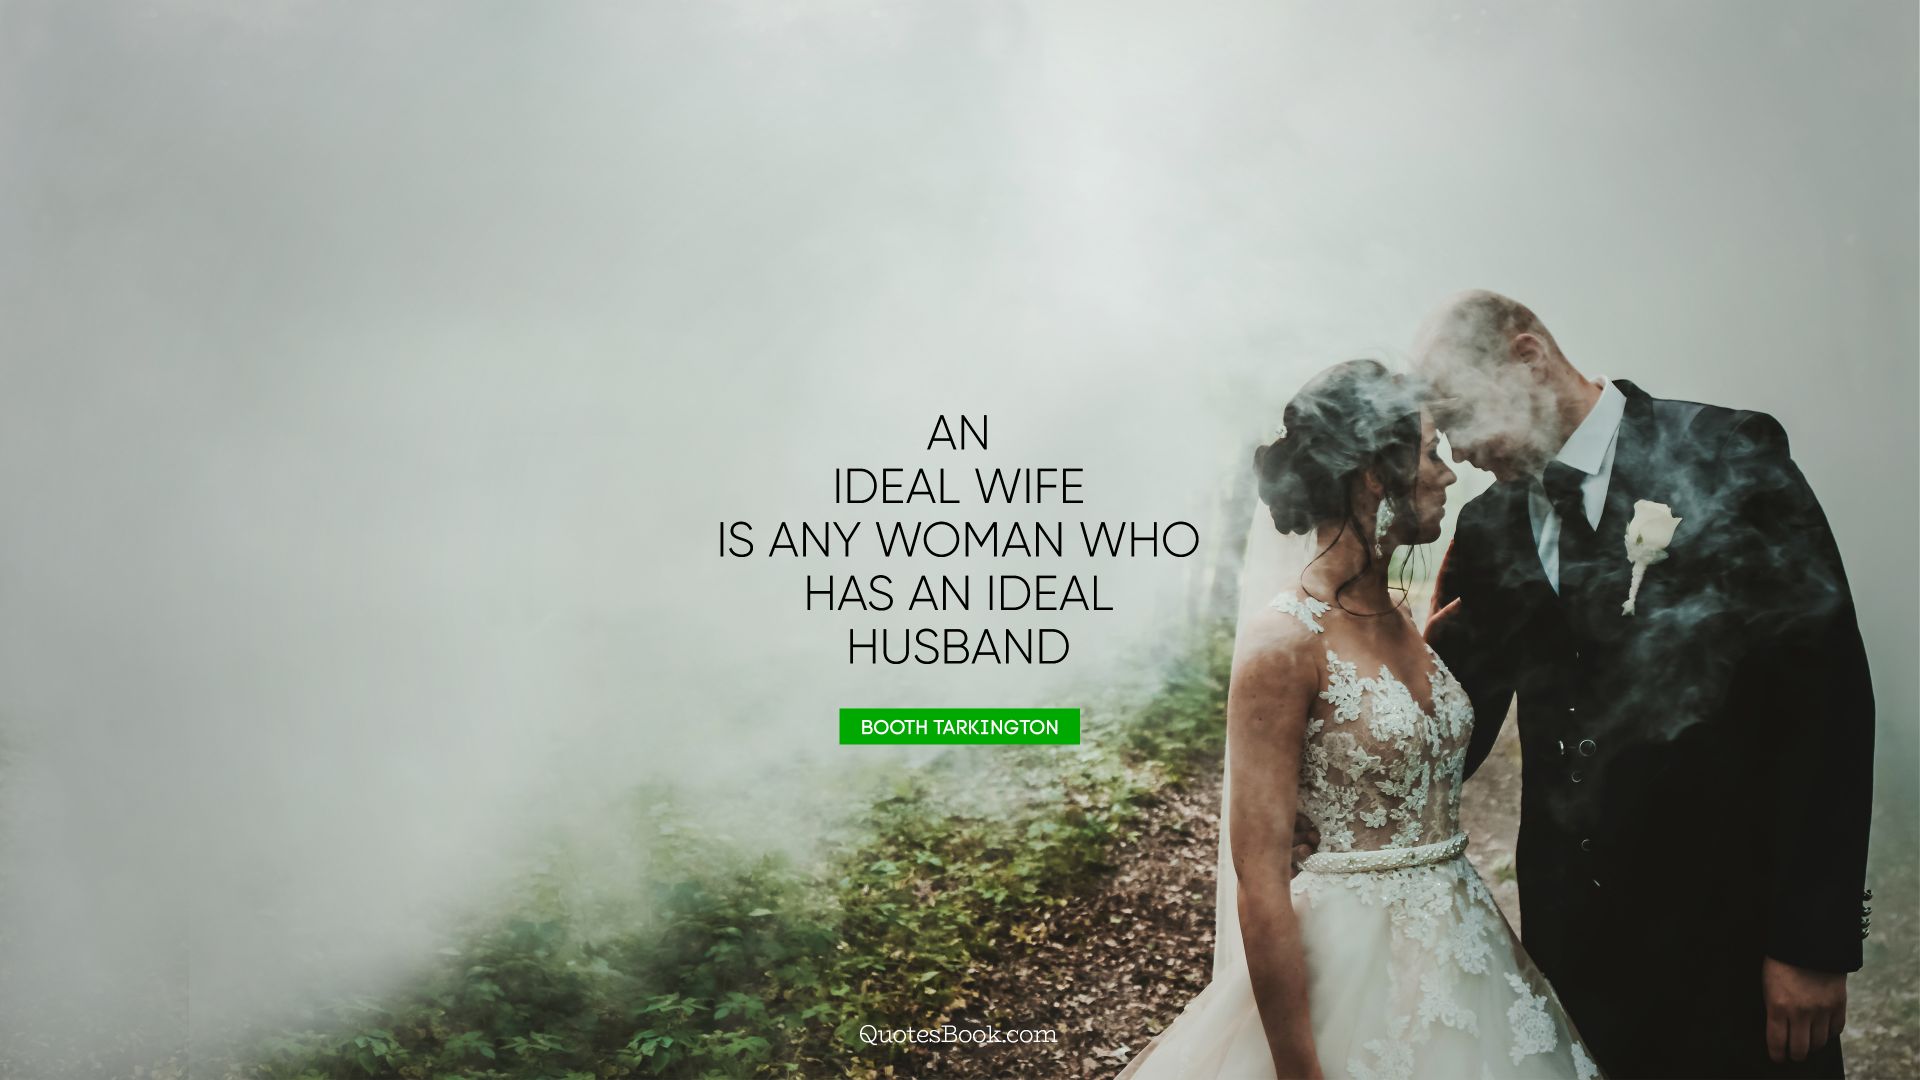 An ideal wife is any woman who has an ideal husband. - Quote by Booth Tarkington